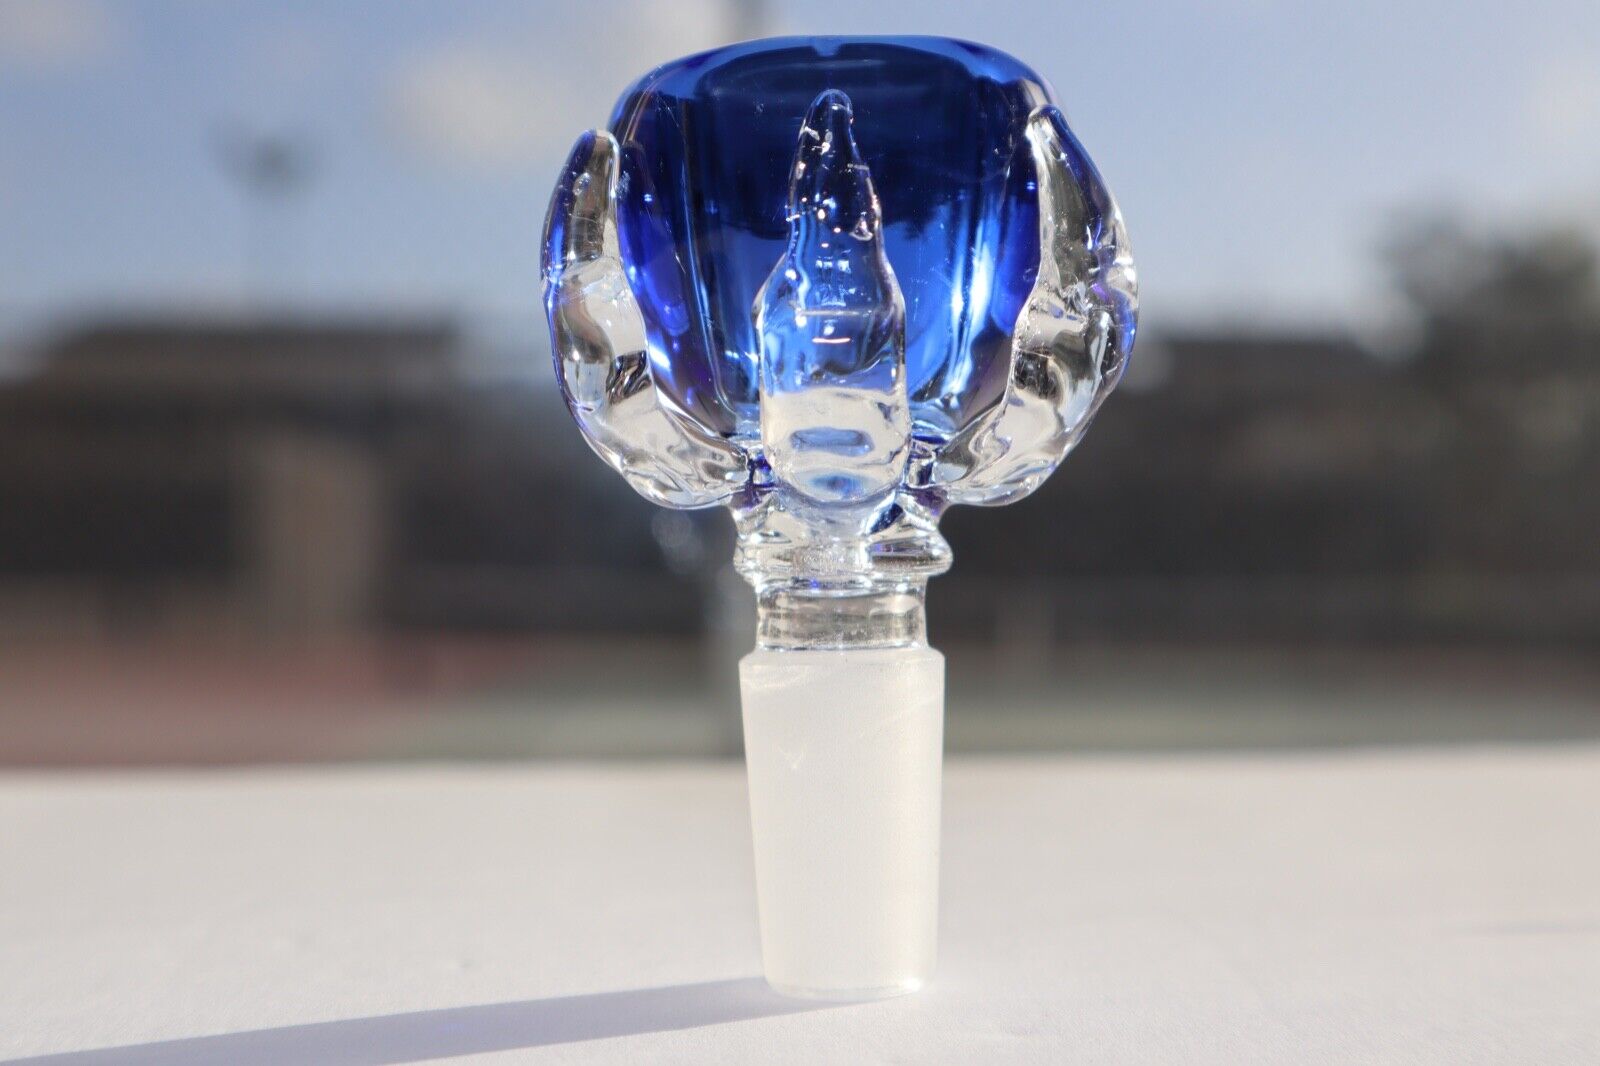 14MM Blue High Quality Glass Claw Water Bong Bowl Head Piece Replacement Holder